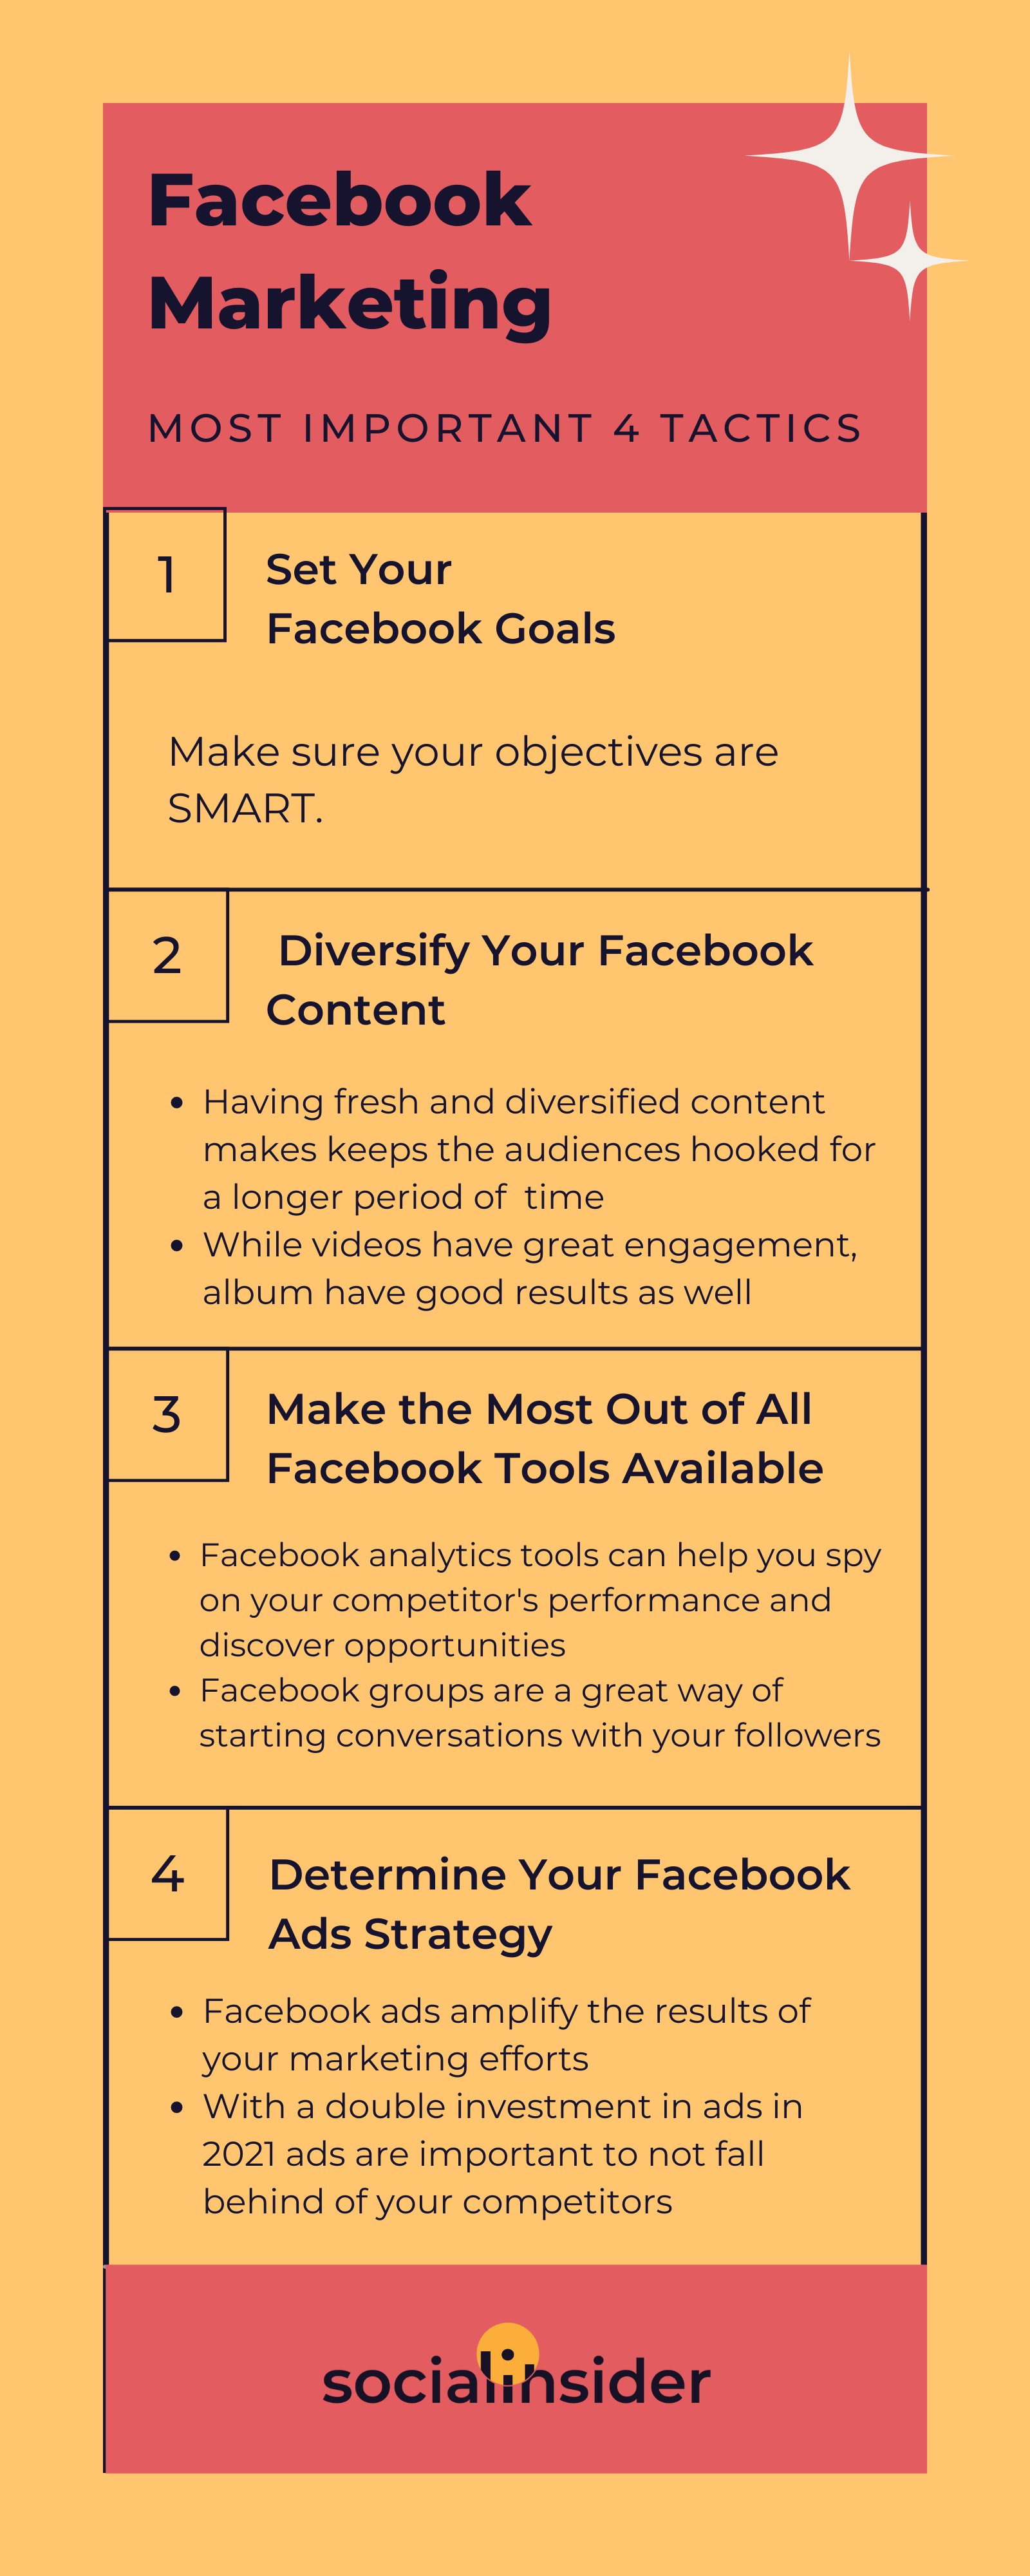 Here is an infographic showing how to create a Facebook marketing strategy